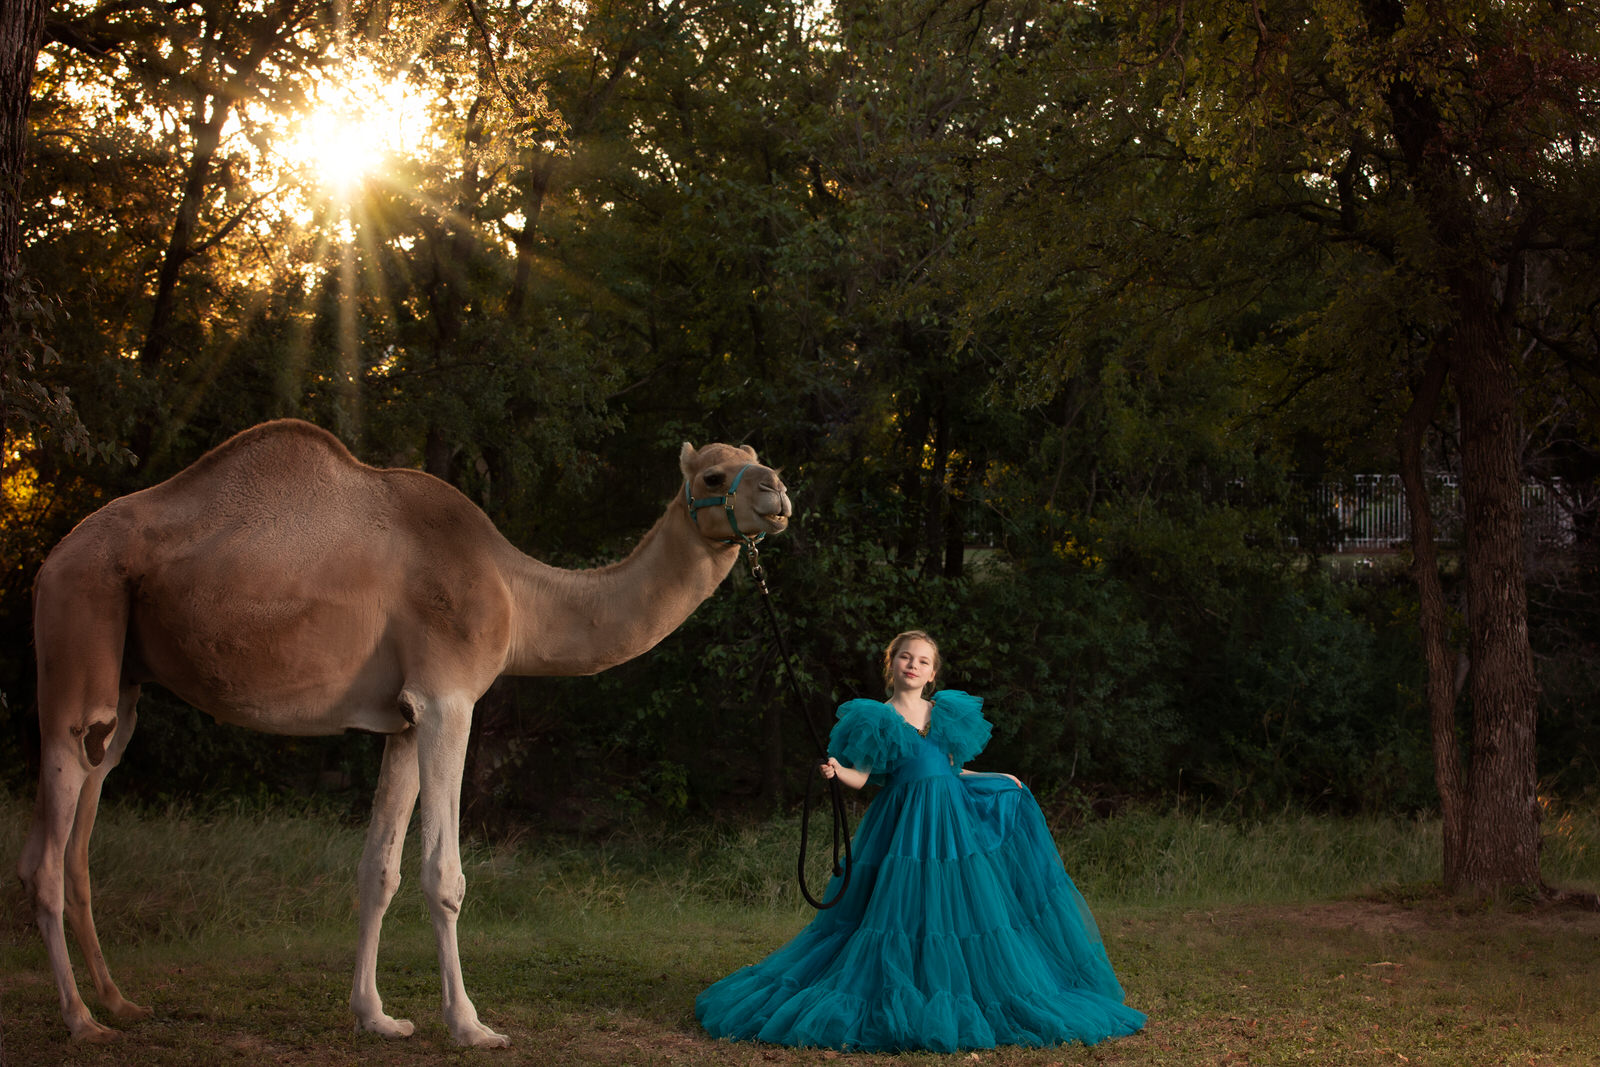 Girl in teal dress leading Camel at sunset